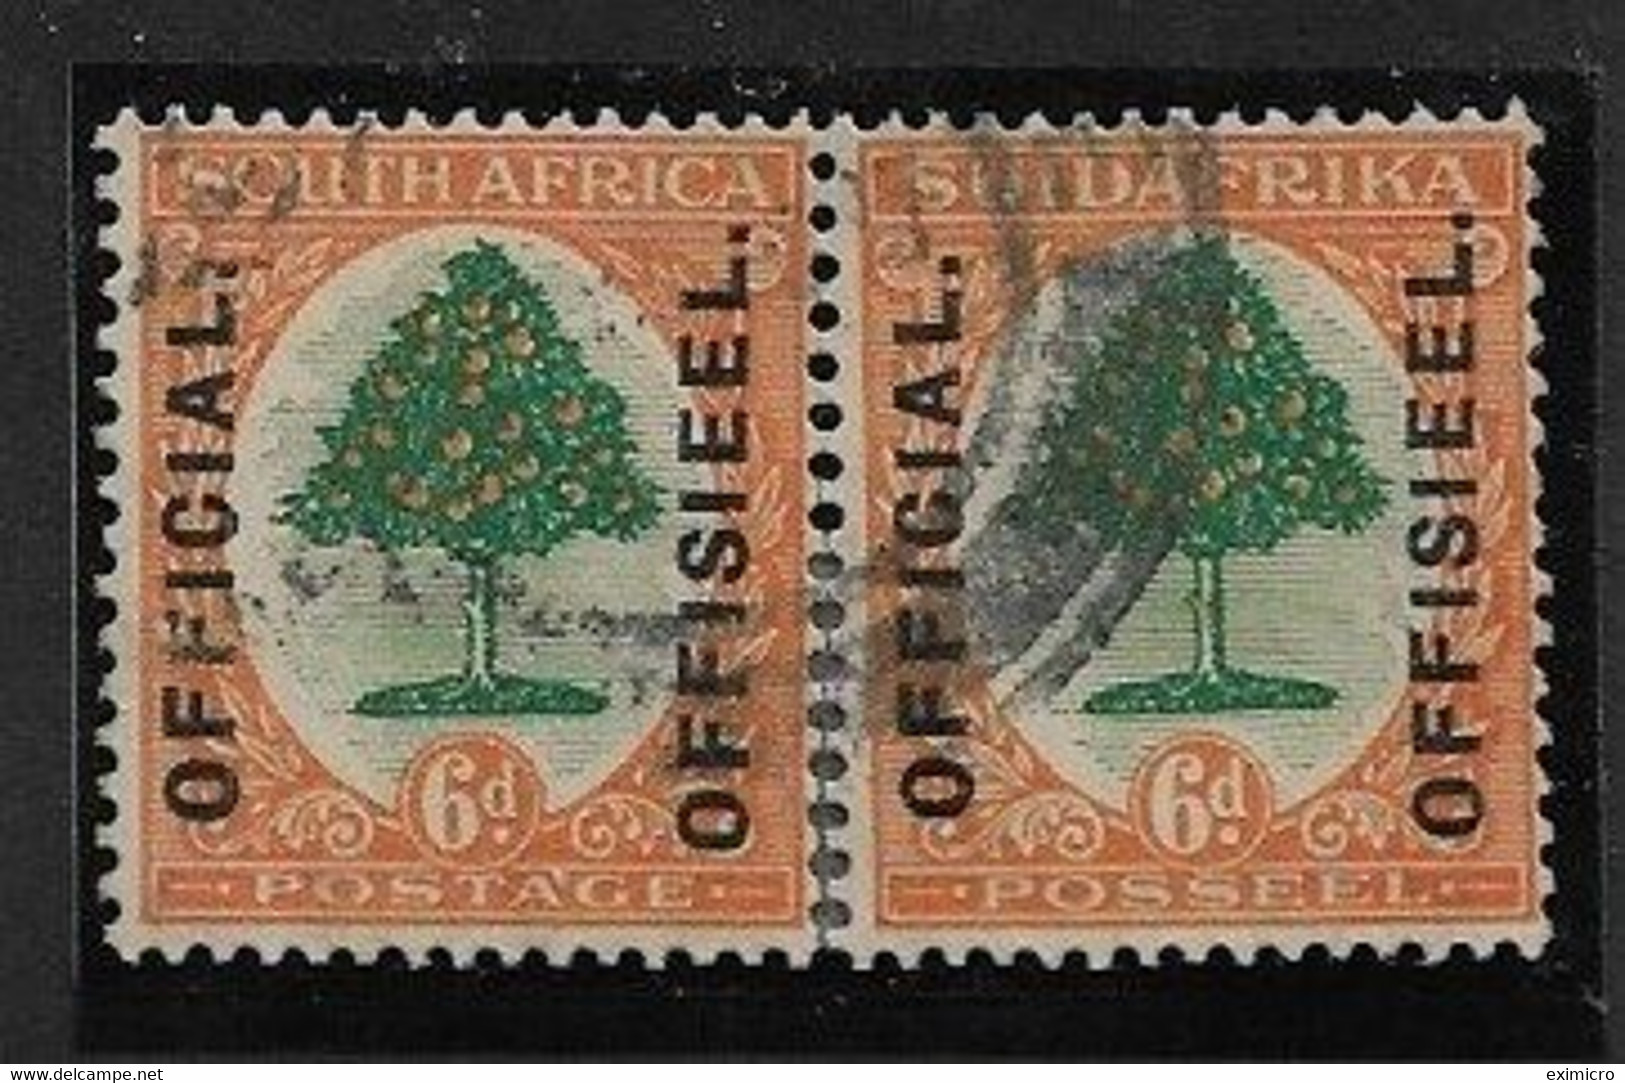 SOUTH AFRICA 1926 6d OFFICIAL BILINGUAL PAIR SG O4 FINE USED Cat £75 - Servizio